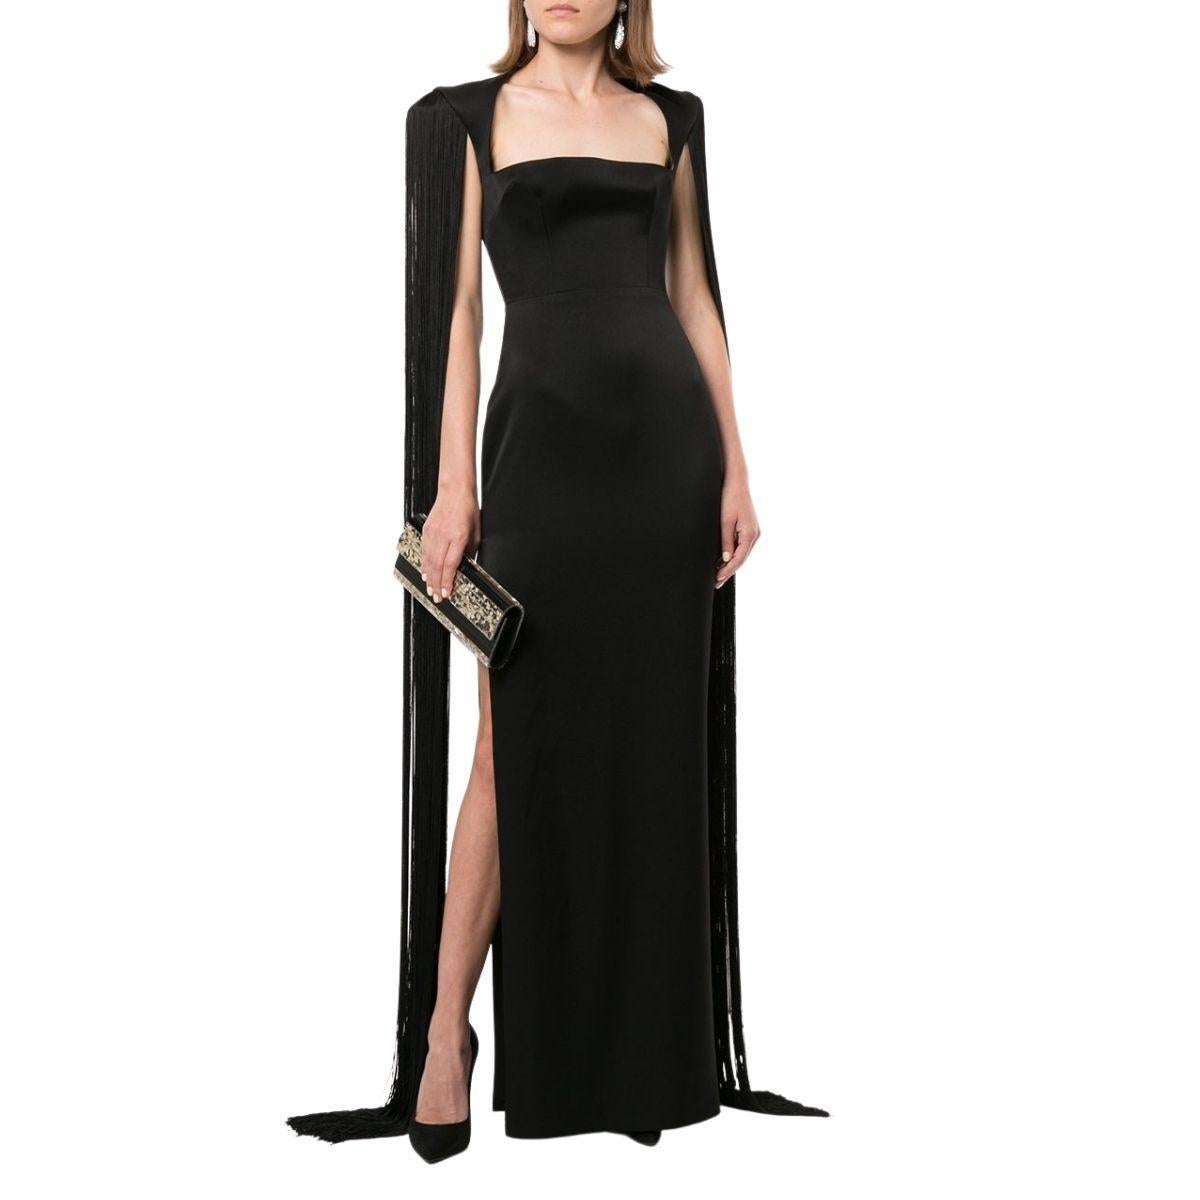 Dallas fringed-sleeve gown
Black Dallas fringed-sleeve gown from Alex Perry featuring structured shoulders, fringe details, a square neck, darts to the chest, an invisible back zip fastening, a side slit and a long length.
Polyester 54%, Triacetate